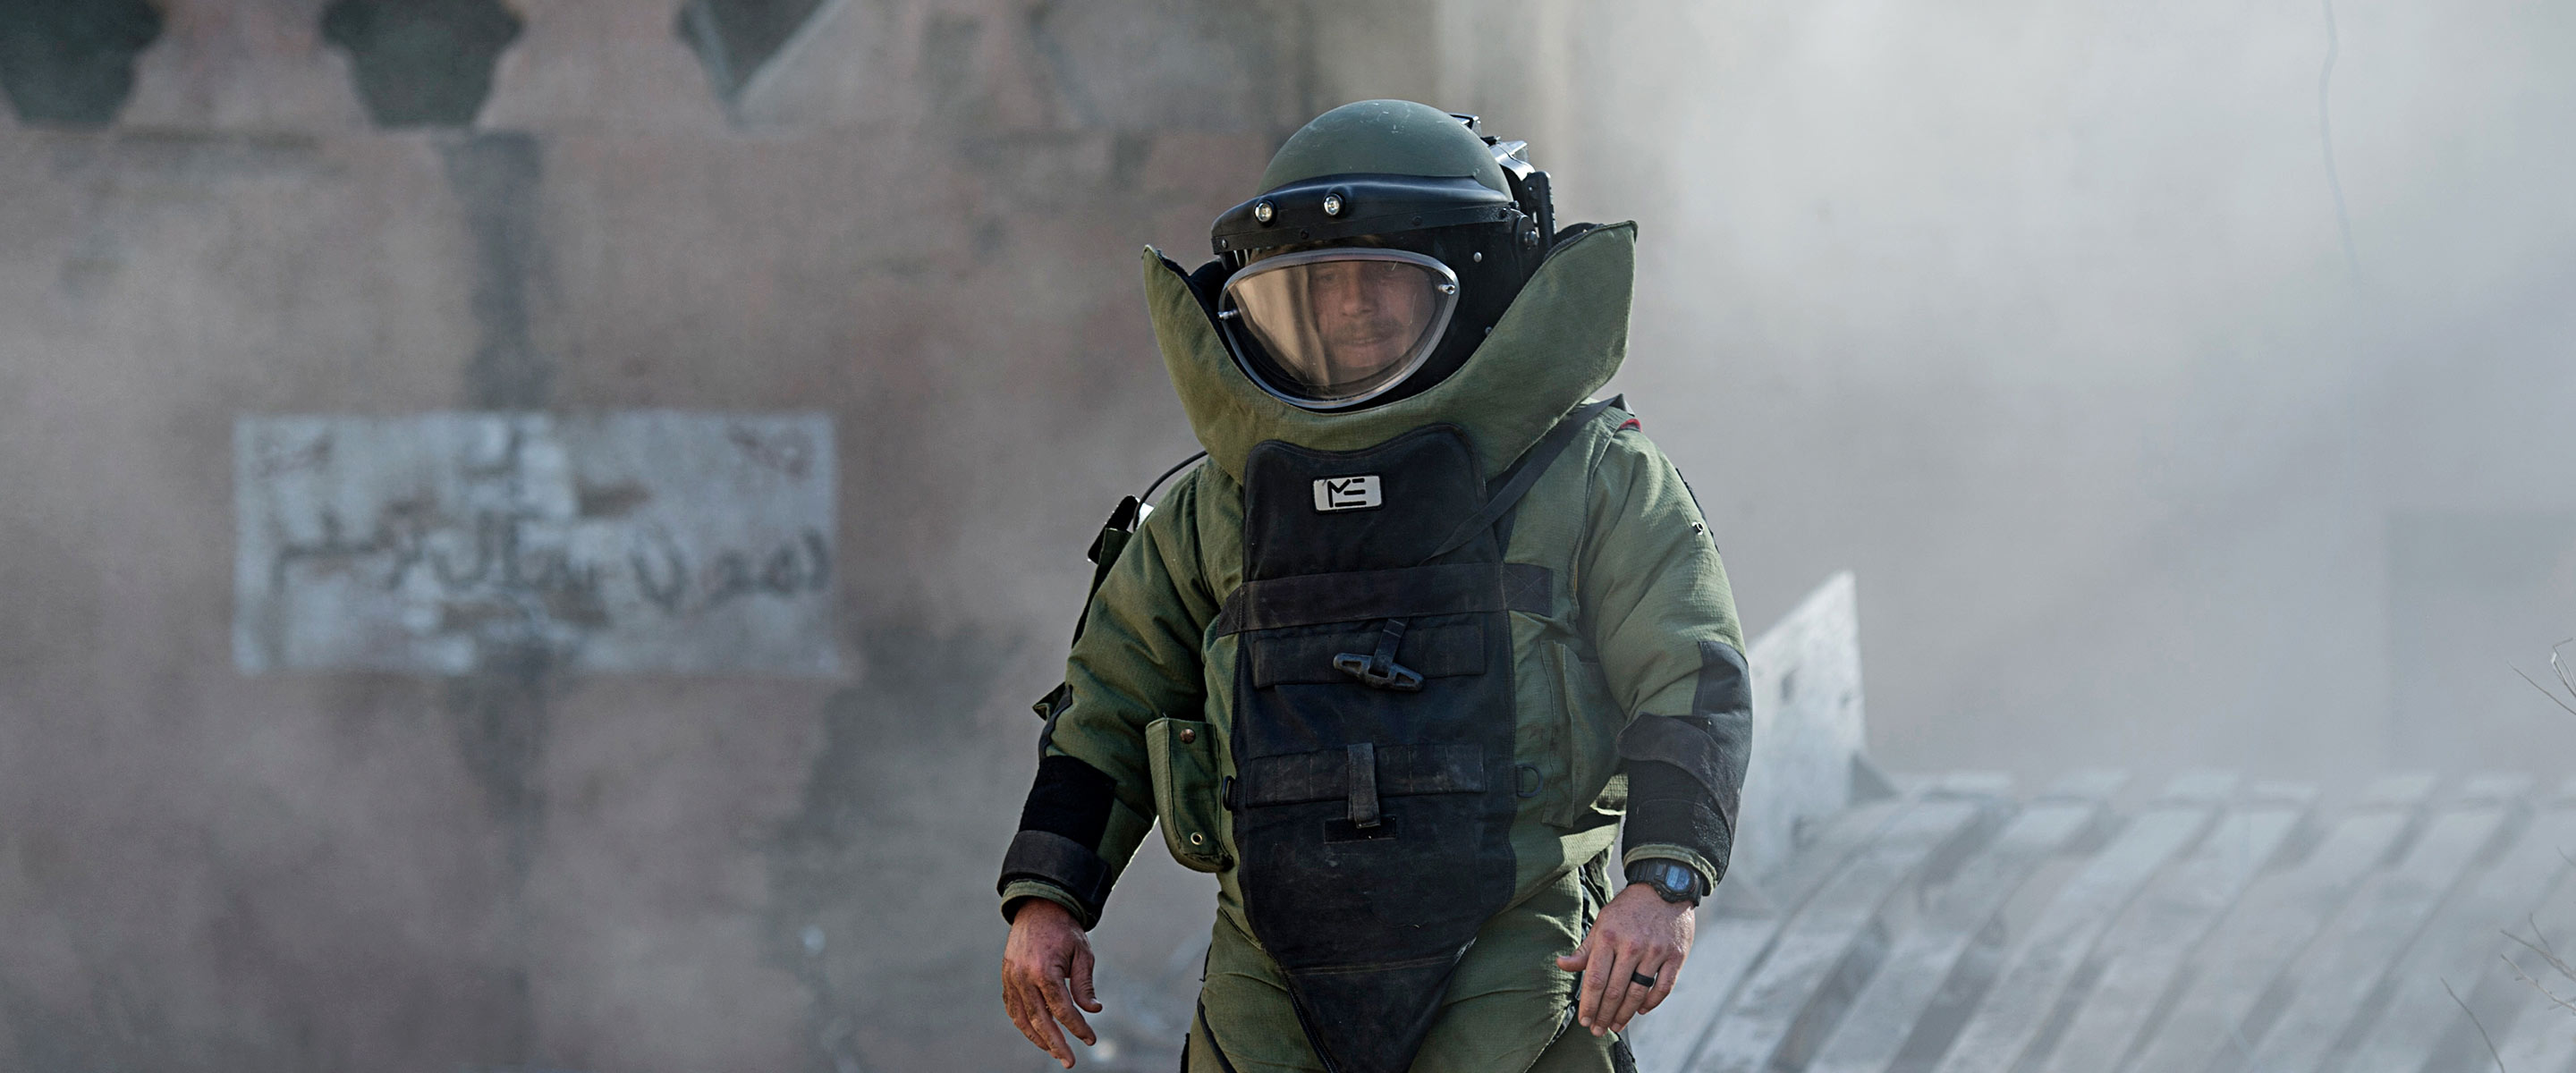 United States Navy Explosive Ordnance Disposal Technician suited up in a bomb suit